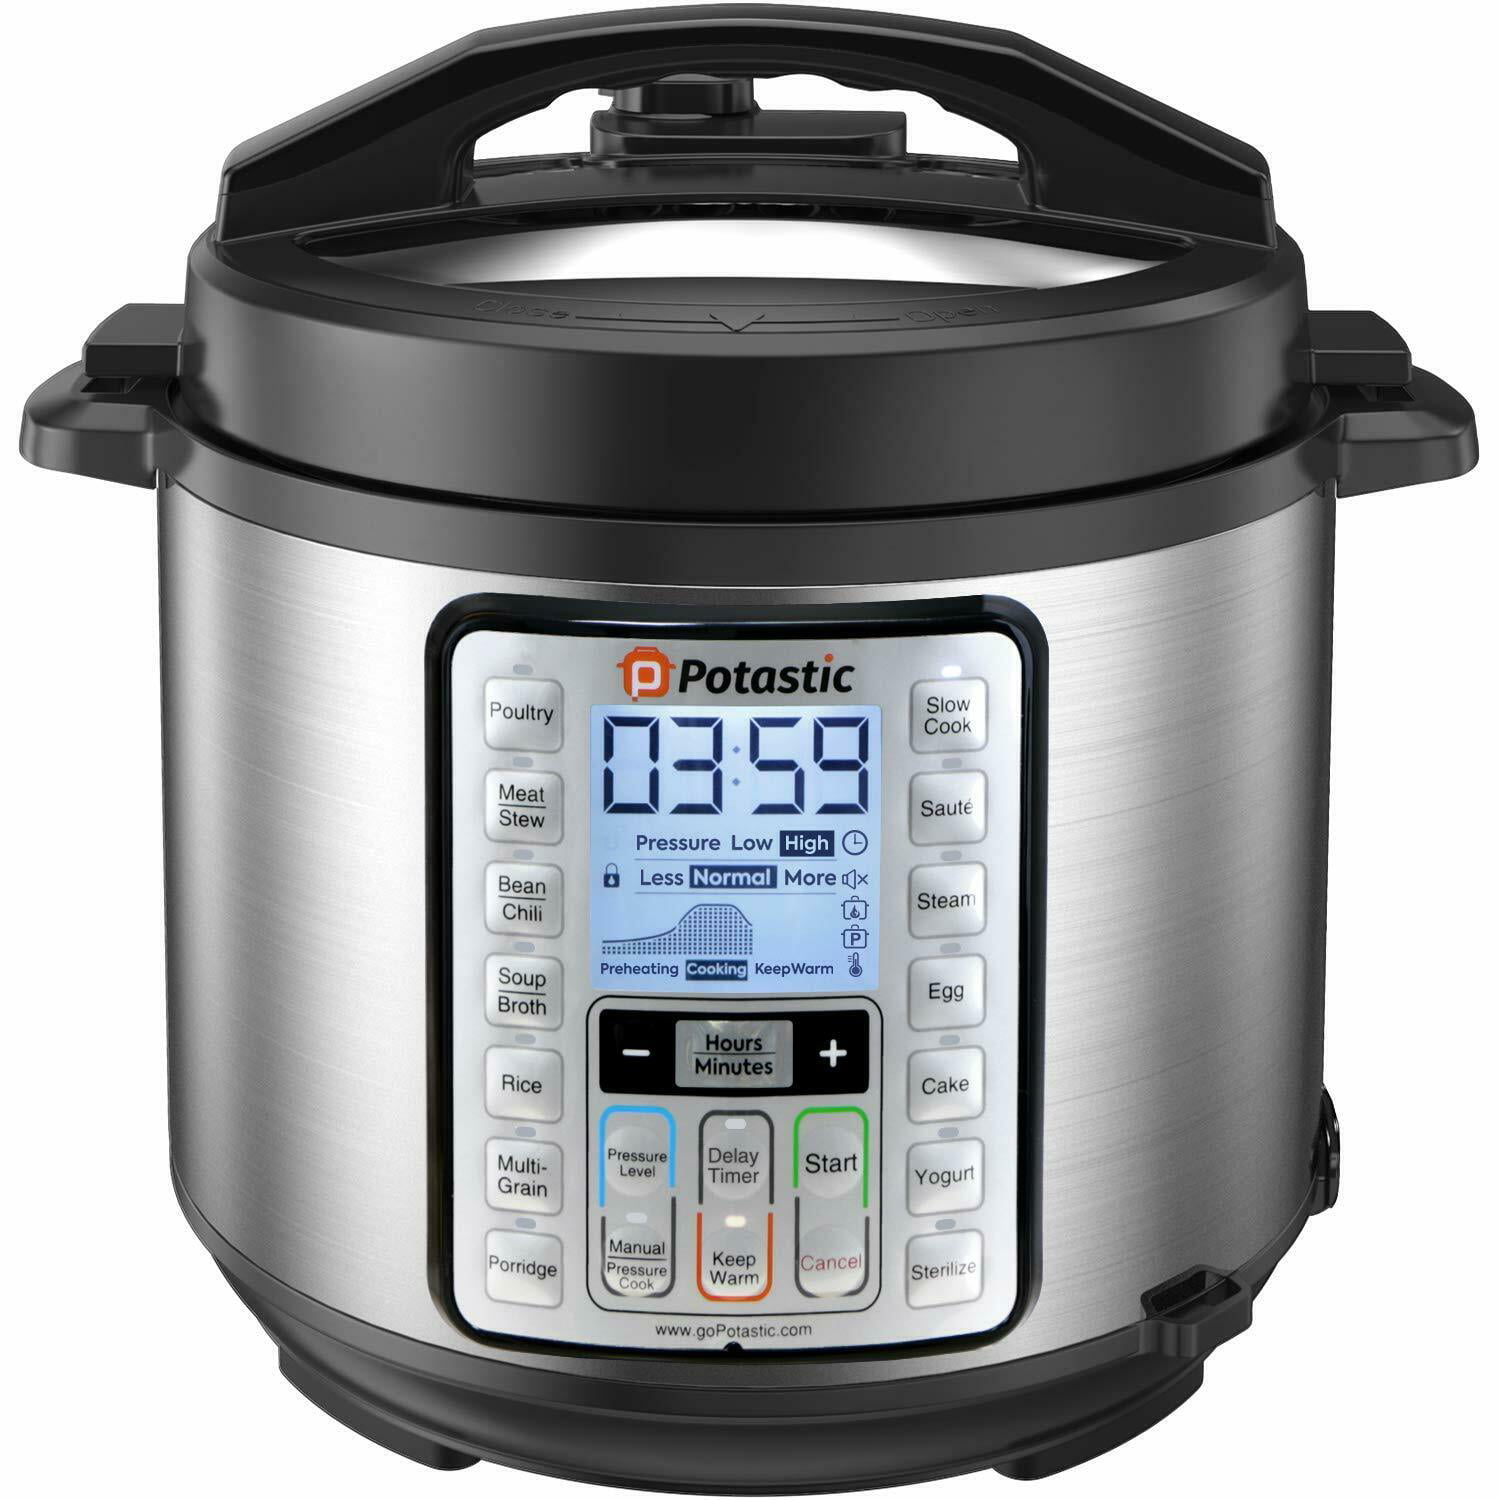 Potastic EP6 10-in-1 Programmable Electric Pressure Cooker,6 Quart,LCD Display,Instant Cooking with Stainless Steel Pot Multi-use for Rice,Yogurt,Egg,Sauté,steam silver 